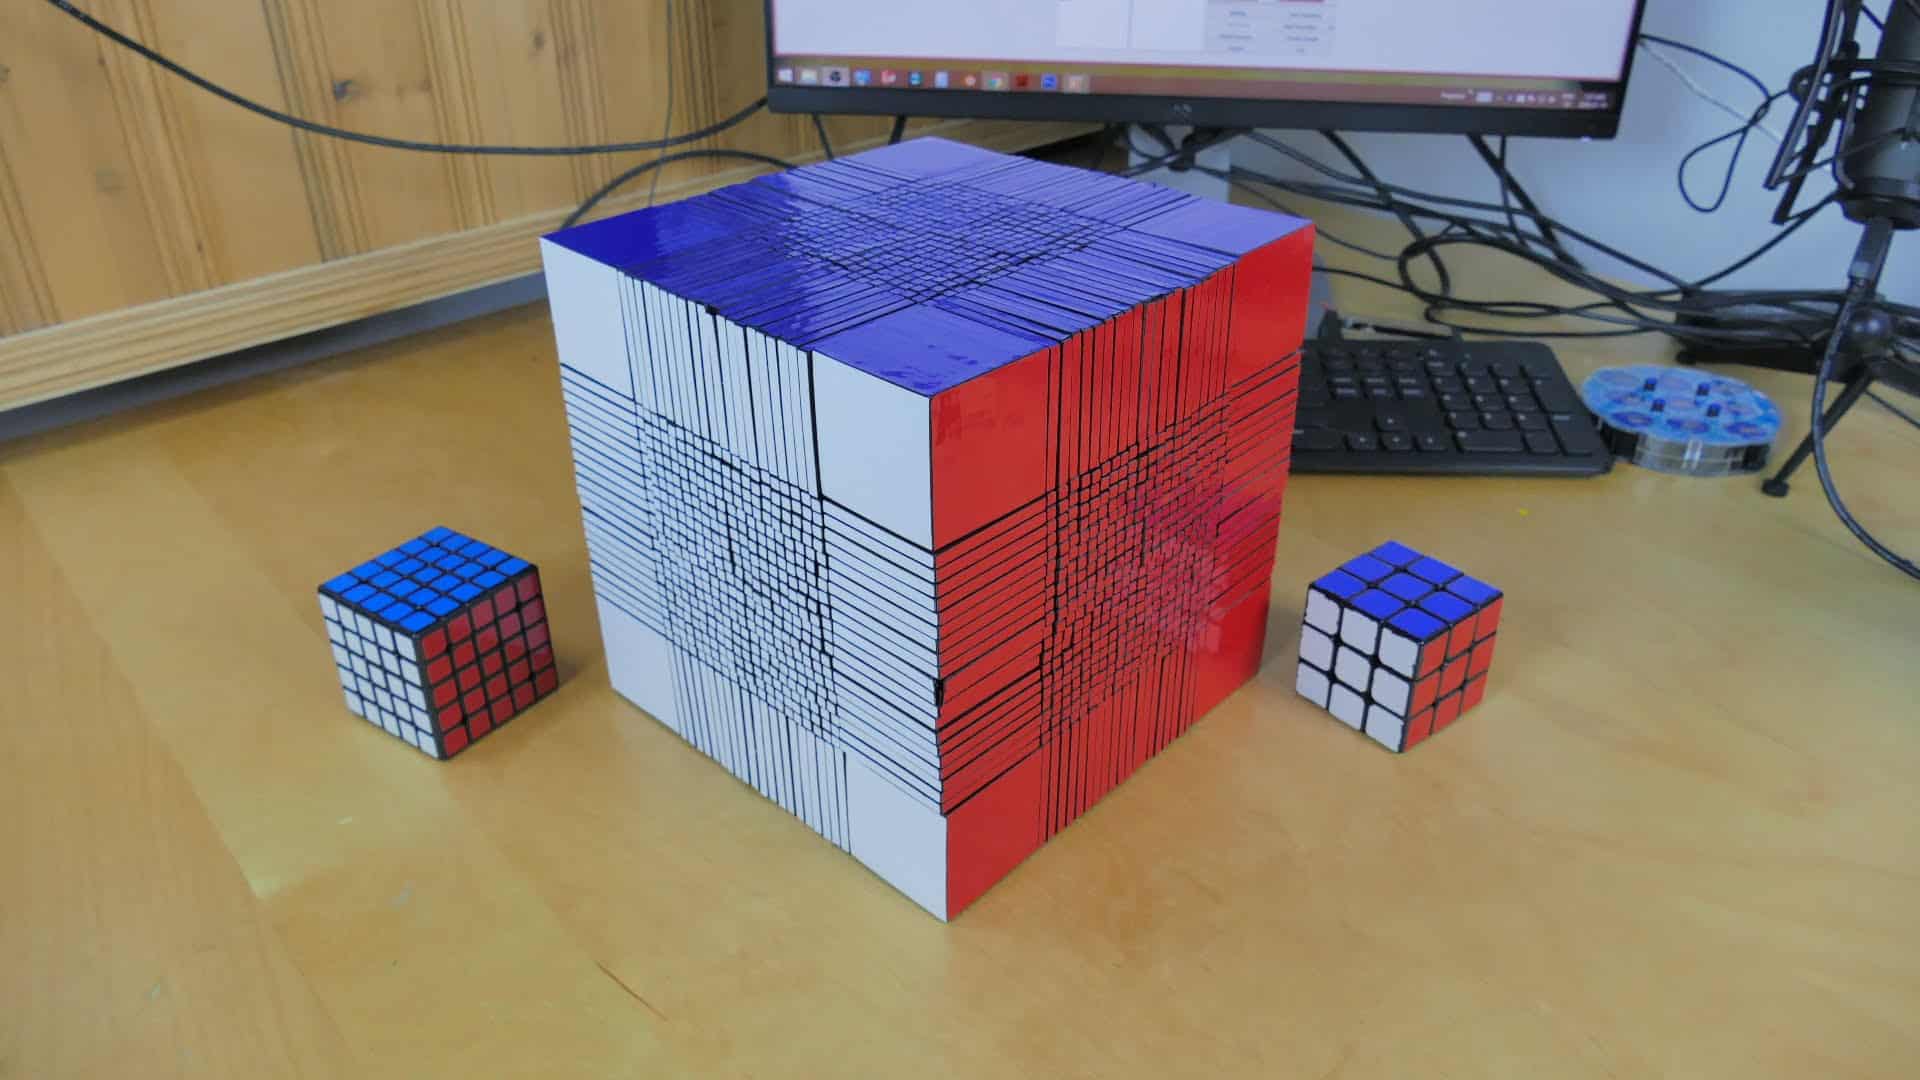 The largest magic cube in the world